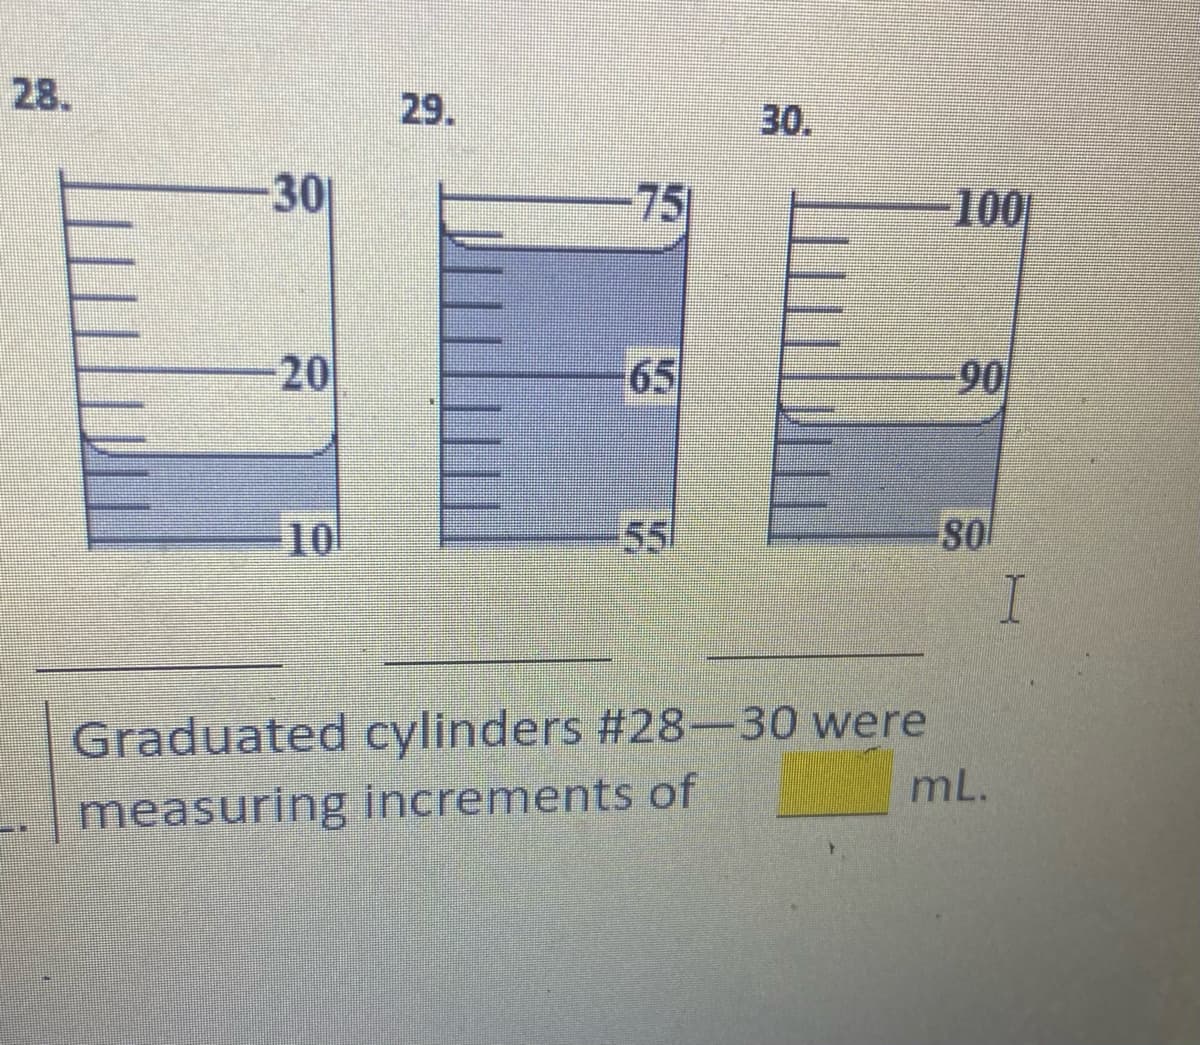 28.
29.
30.
75
100
20
65
90
10
55
80
Graduated cylinders #28-30 were
mL.
measuring increments of
30
